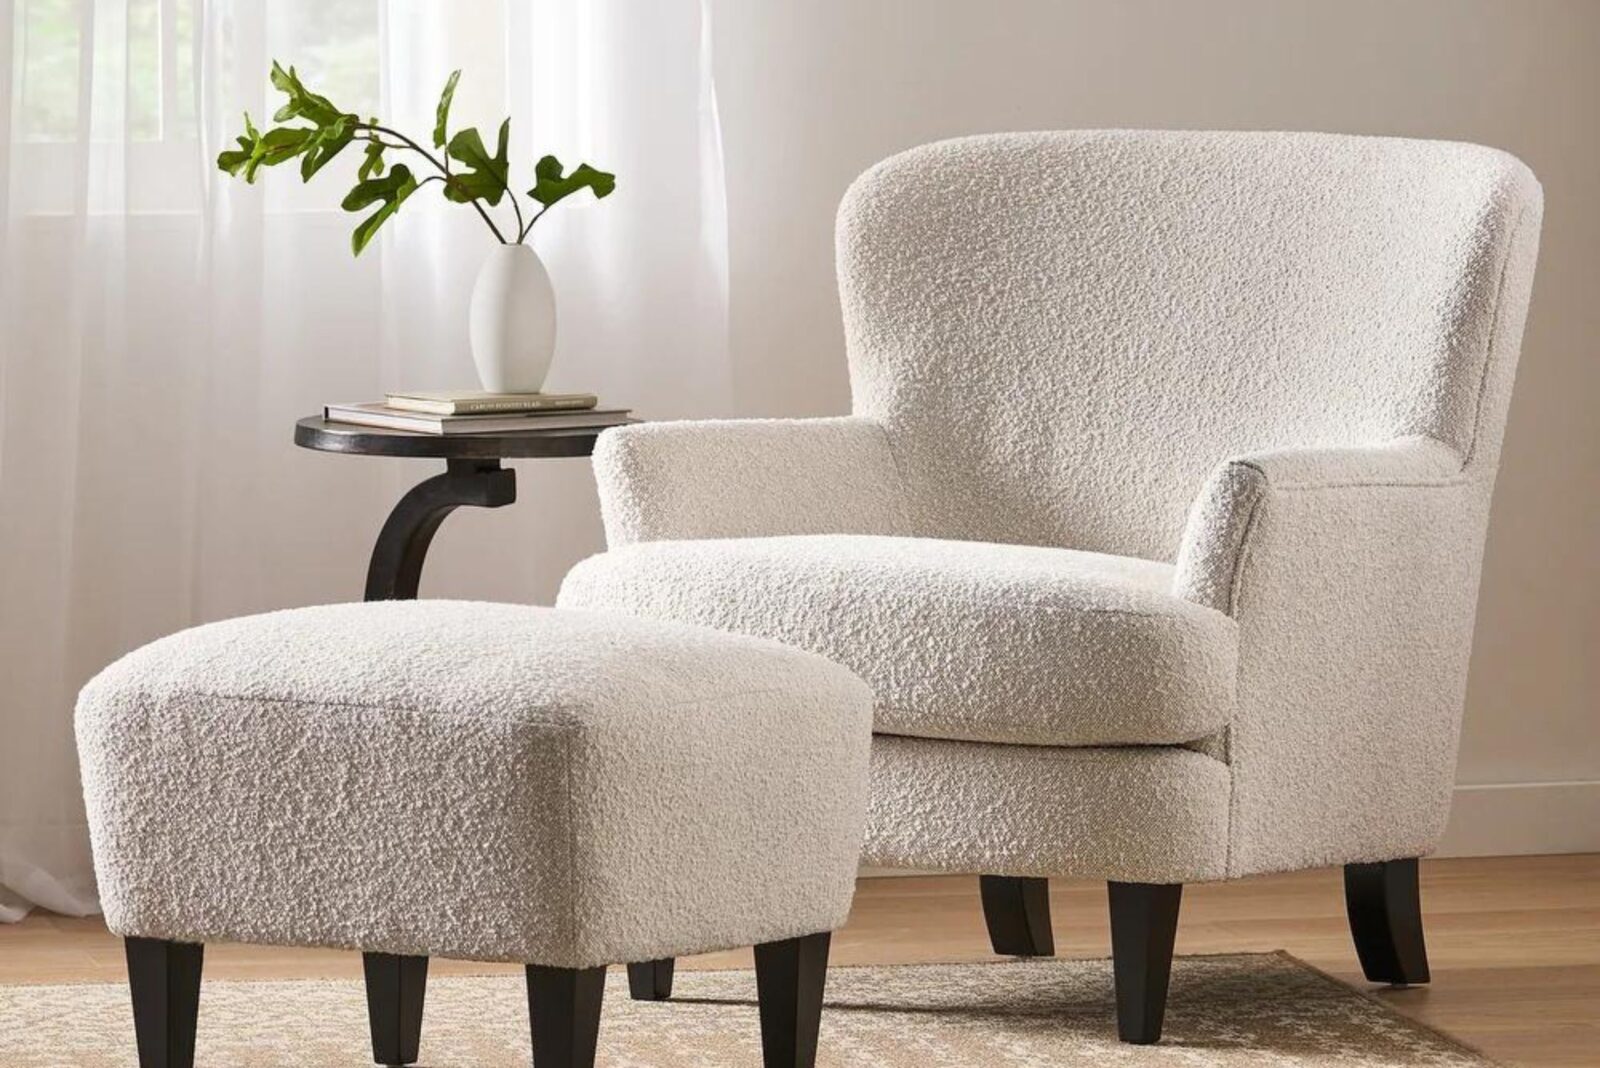 The Best Comfy Living Room Chairs To